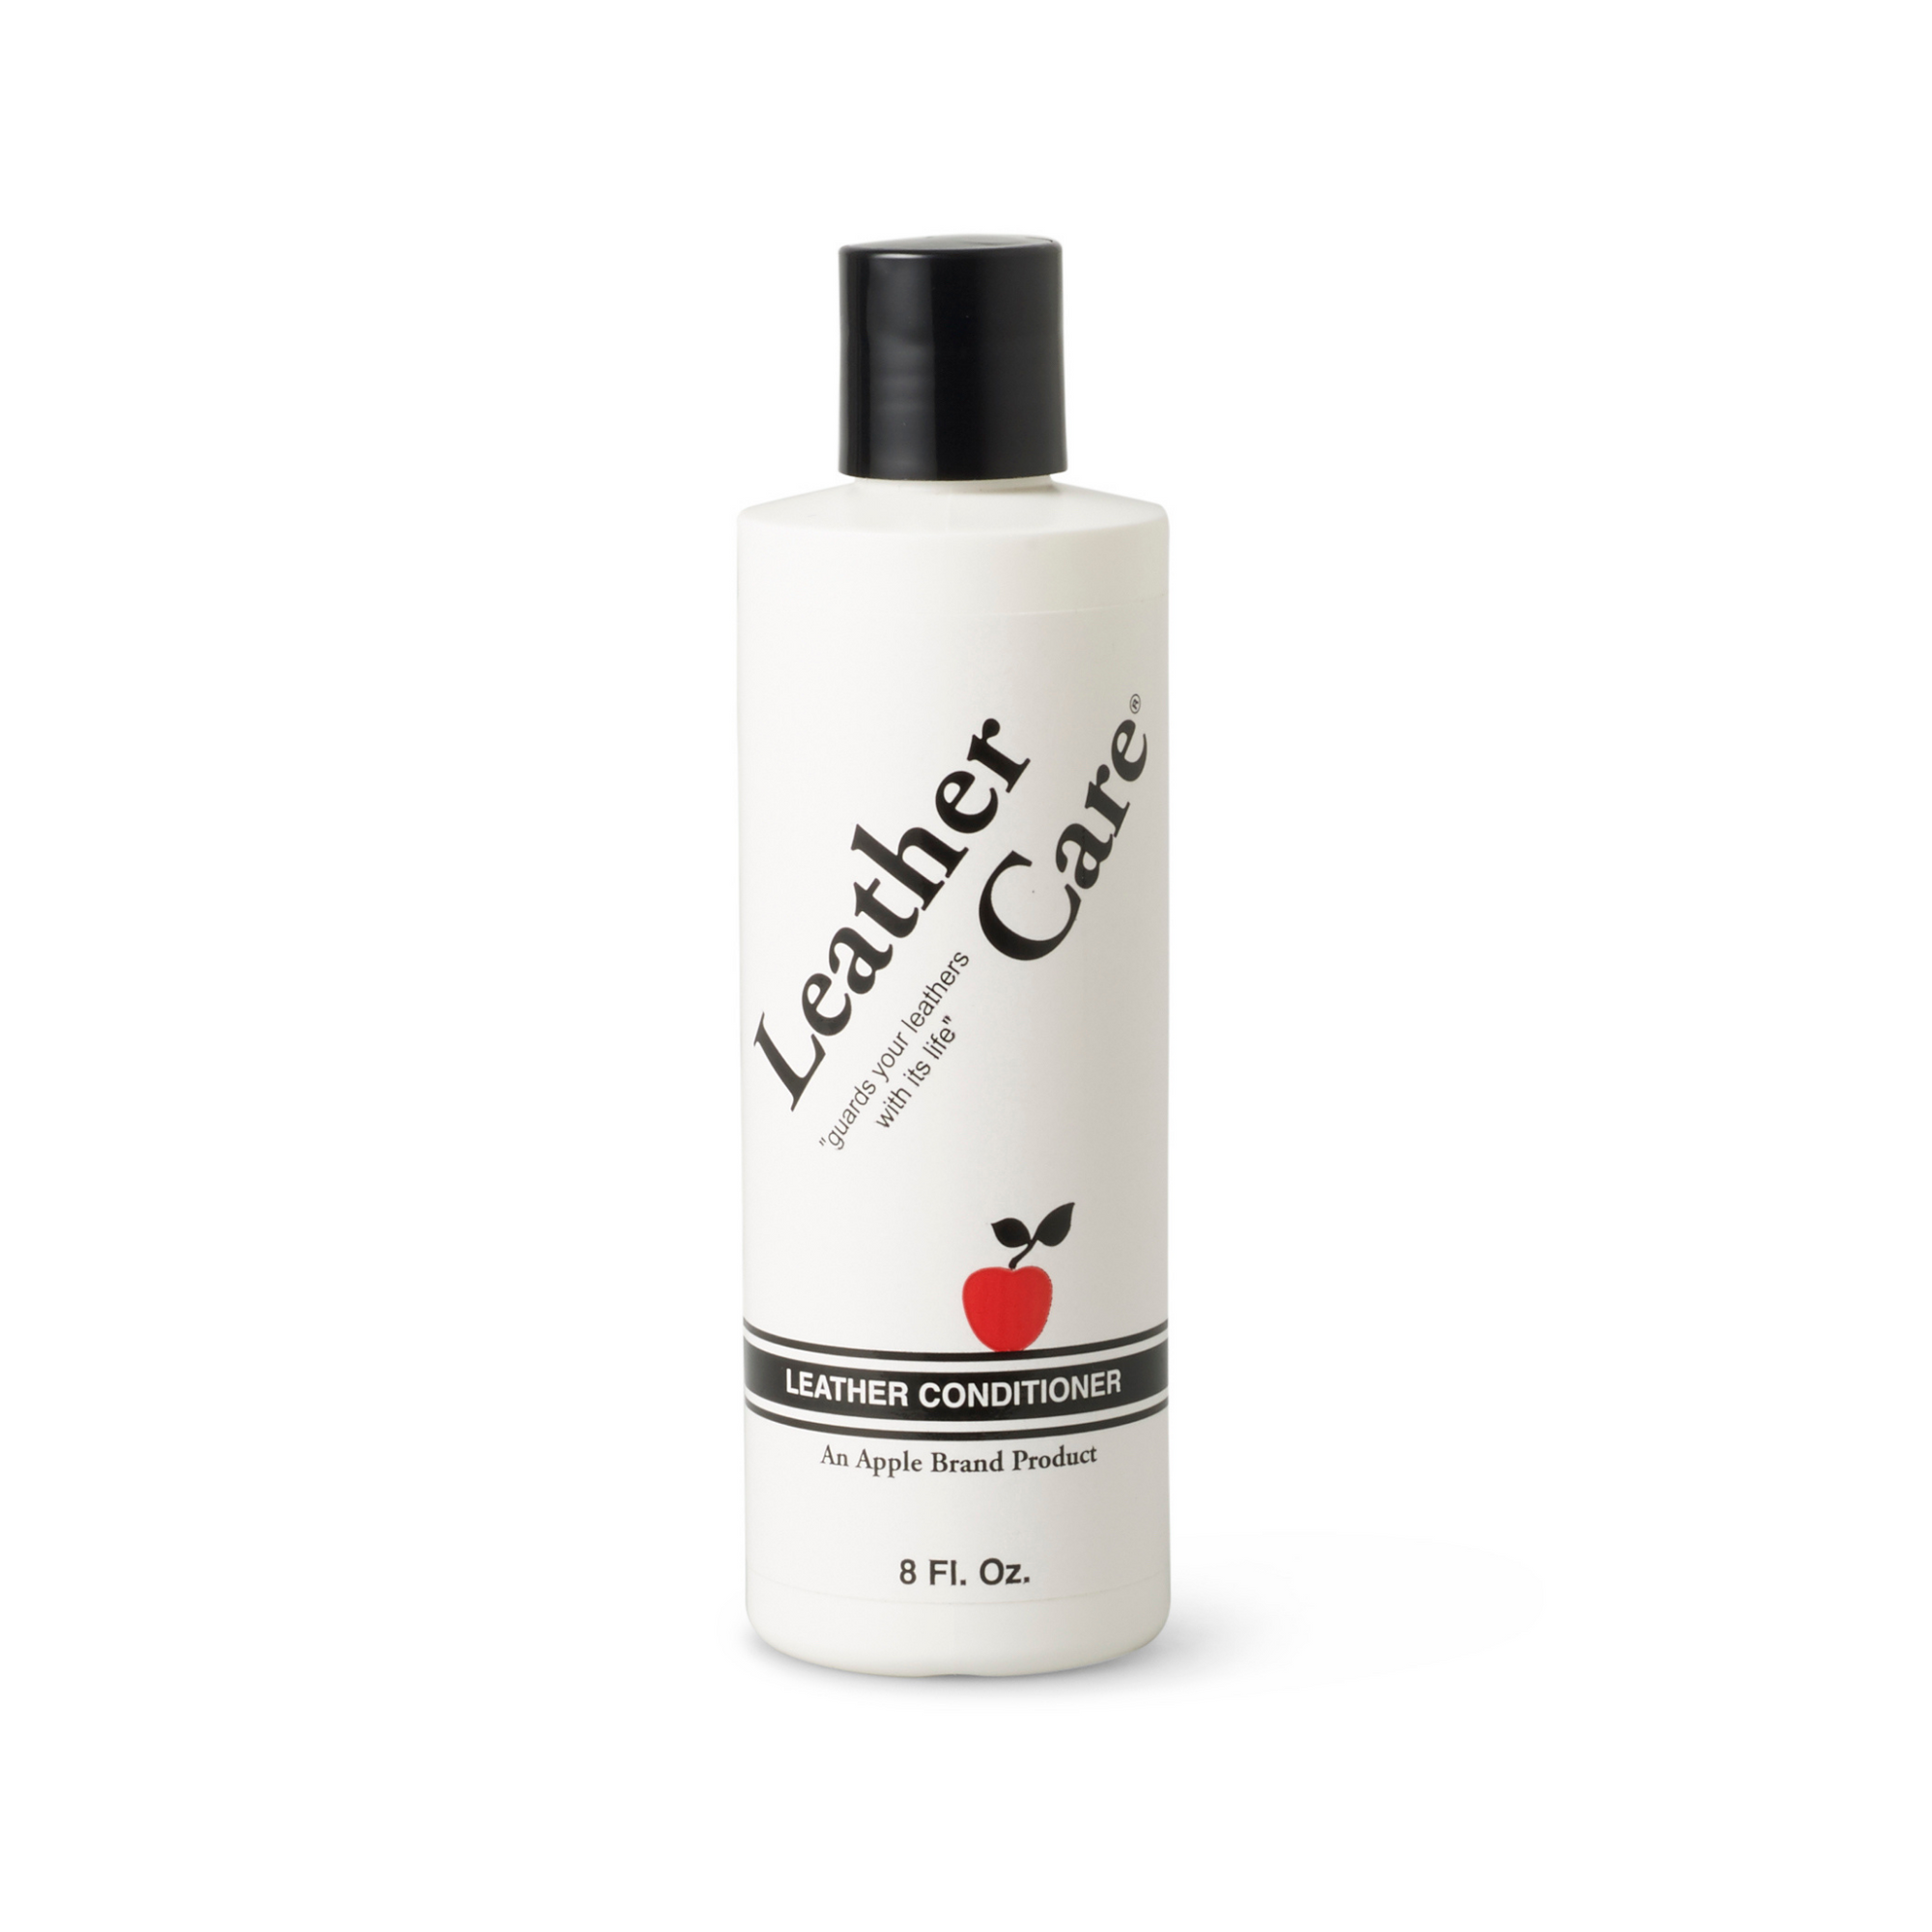 Apple brand leather care leather conditioner for premium ladies hand bags. Stocked in Little Lusso Australia